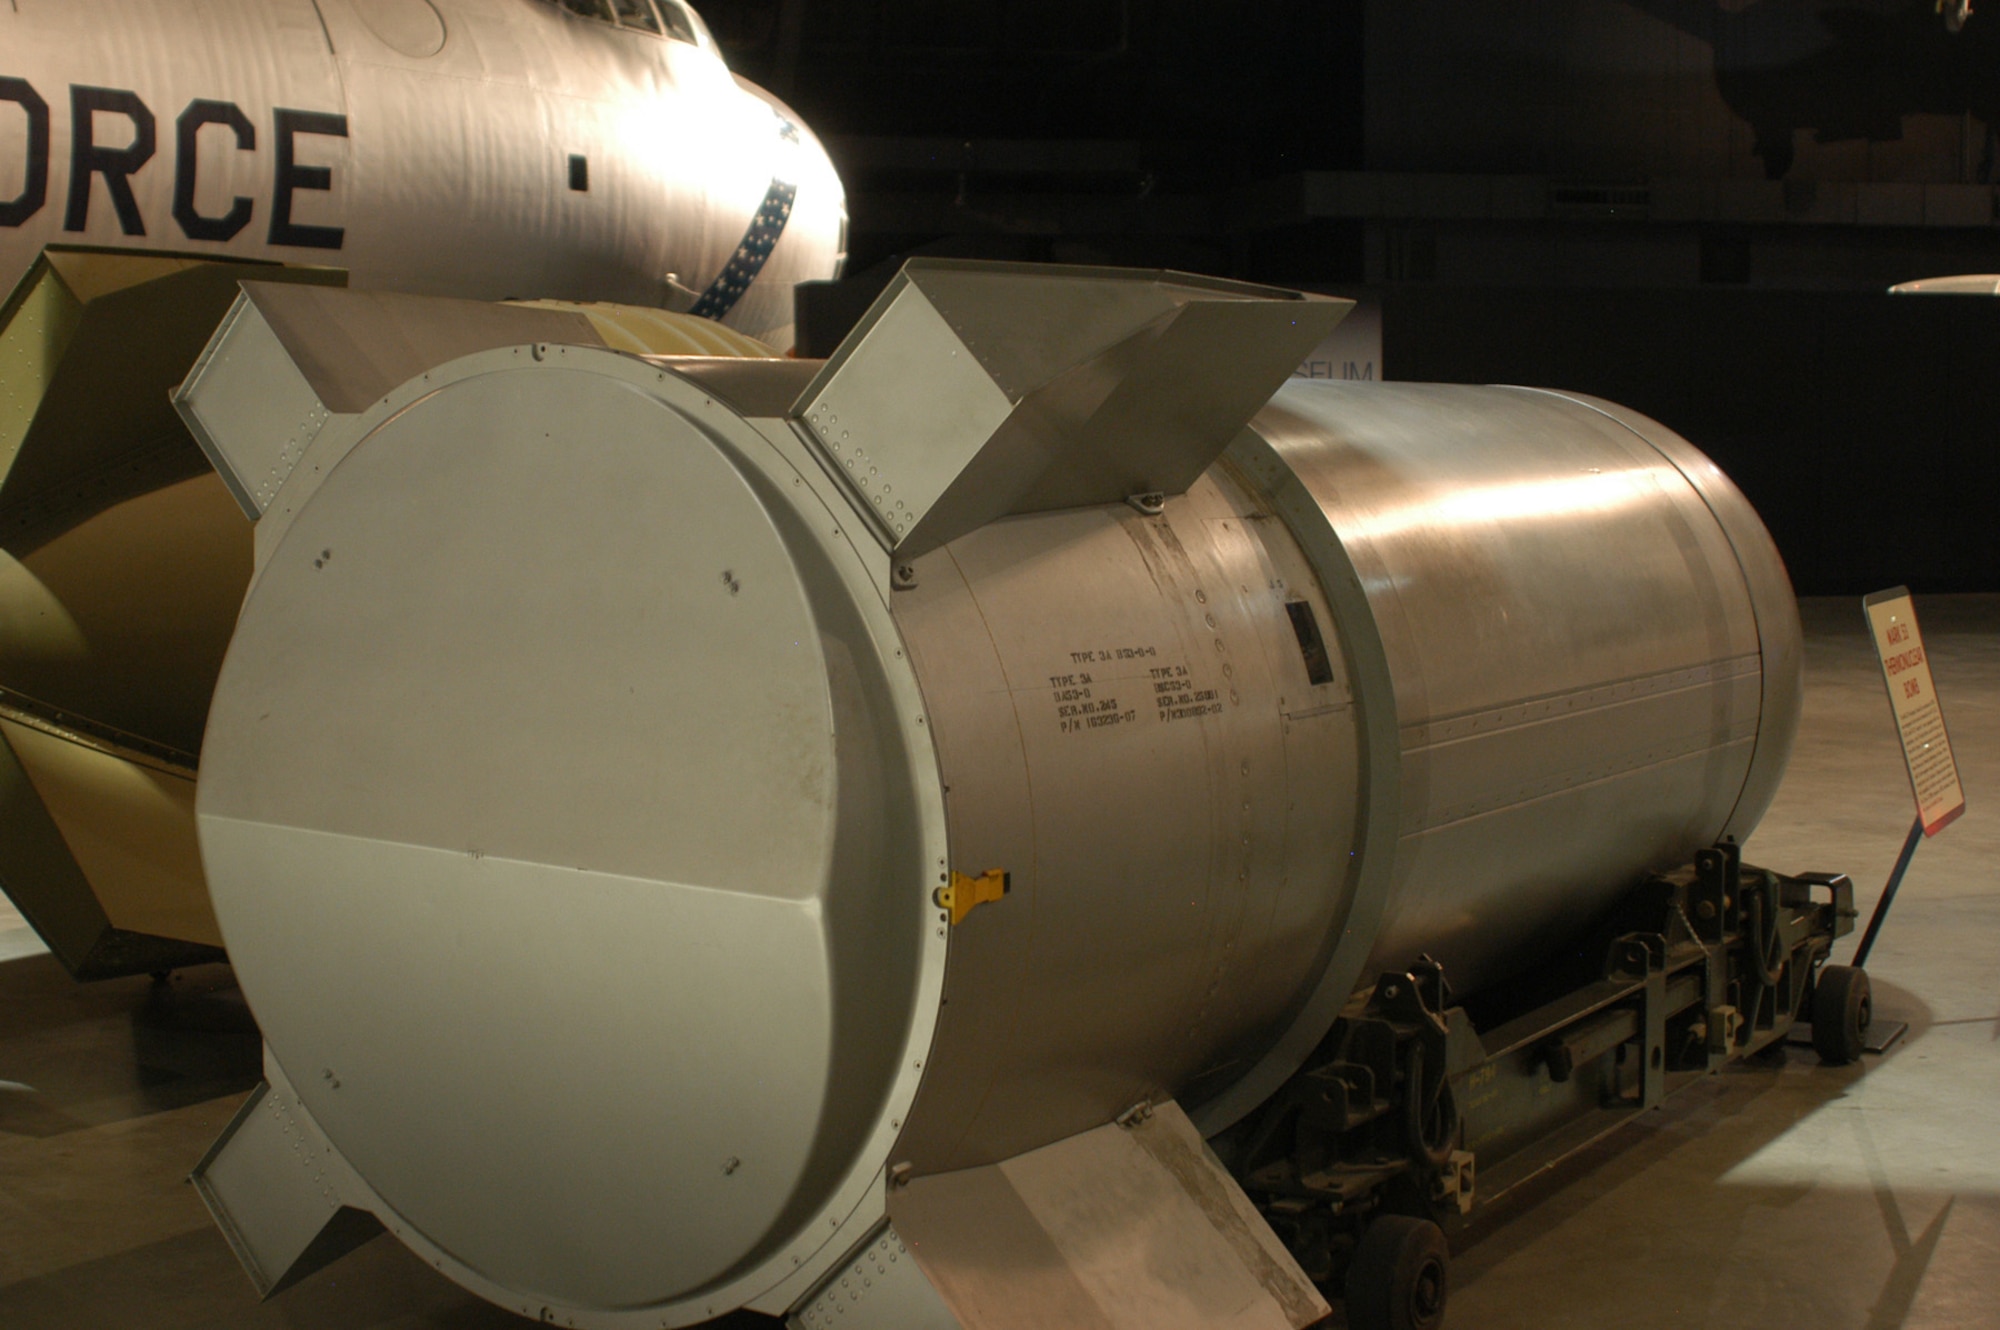 DAYTON, Ohio - B53 Thermonuclear Bomb on display at the National Museum of the U.S. Air Force. (U.S. Air Force photo)